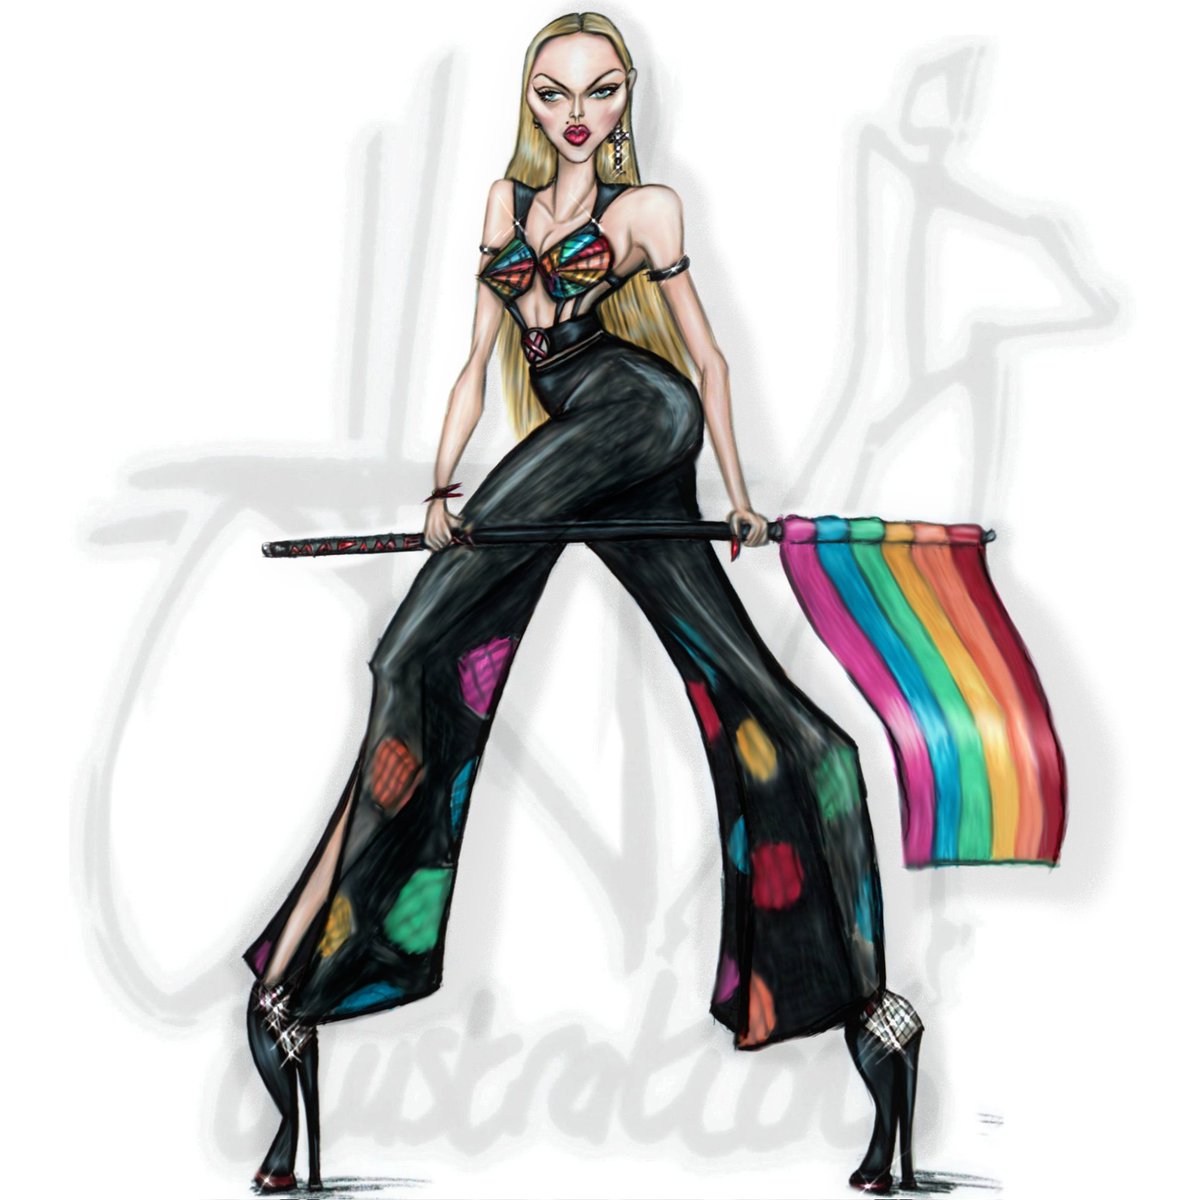 World Pride Month. feat @Madonna . Originally a costume design idea I had for her upcoming and much anticipated Celebration World Tour, commencing next month.
#madonna #drawing #illustration #fashionillustration #pride #gaypride #gayflag #queenofpop #costumedesign #Celebration